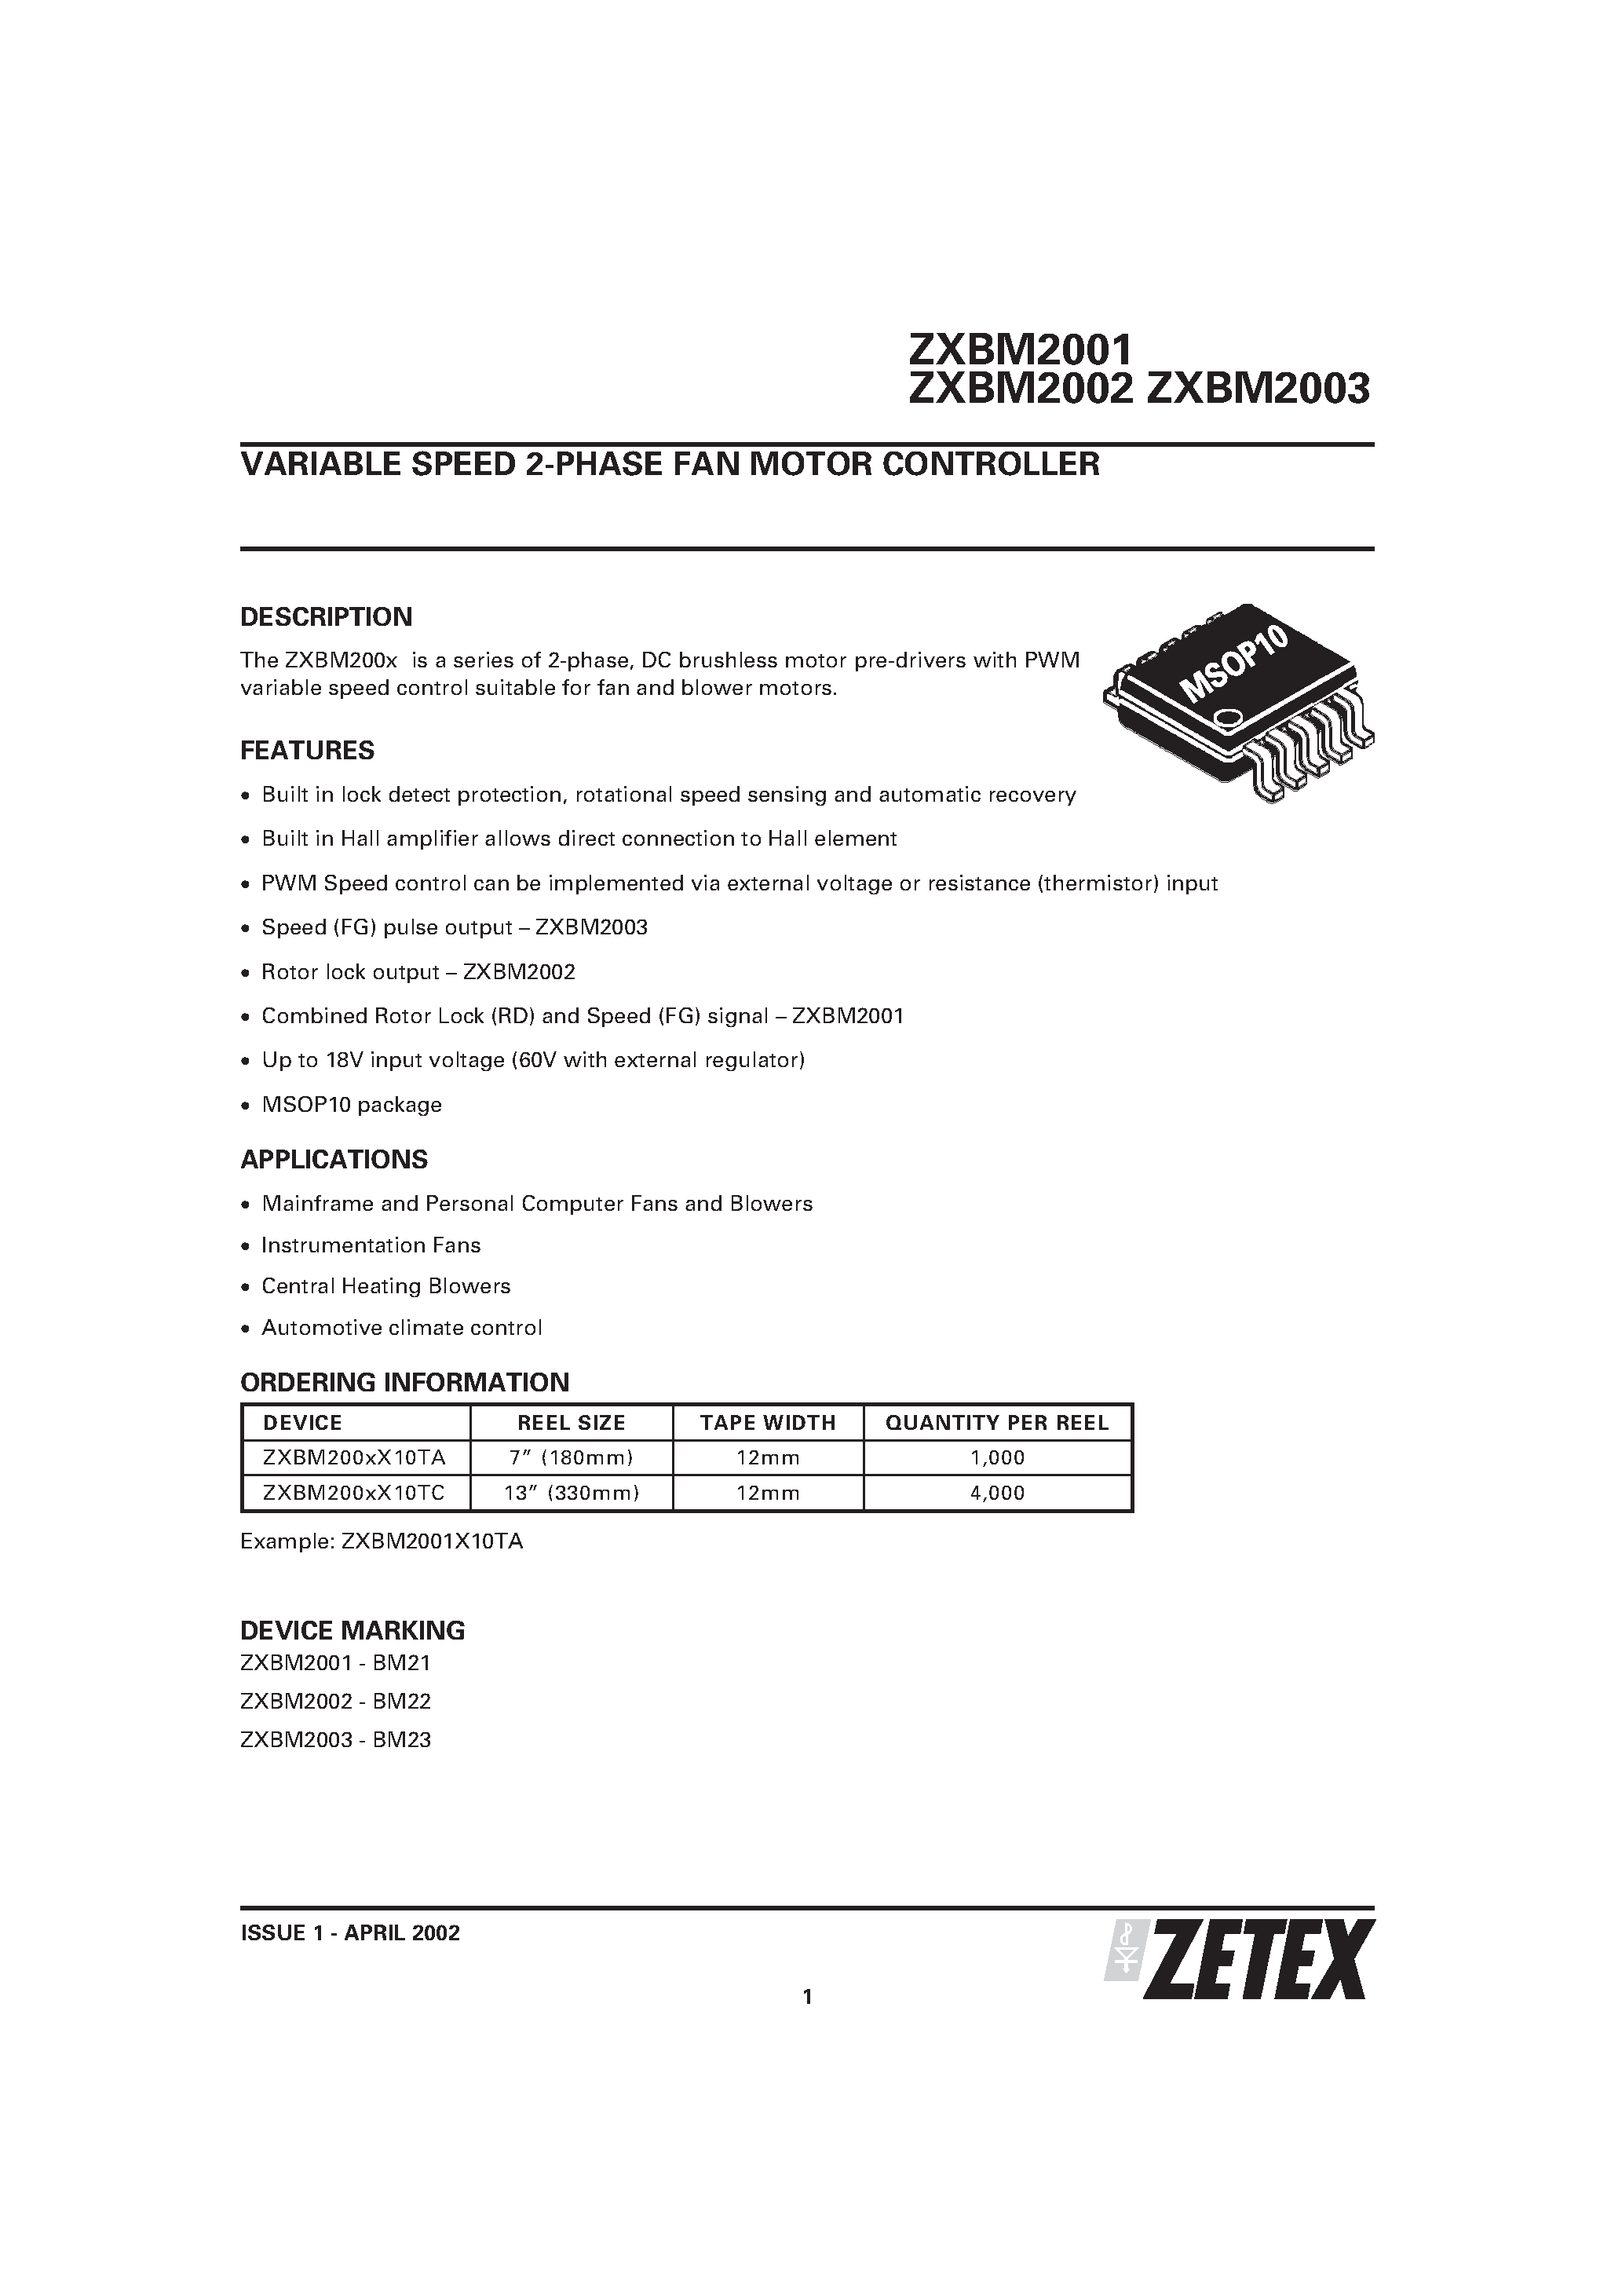 Datasheet ZXBM2003 - VARIABLE SPEED 2-PHASE FAN MOTOR CONTROLLER page 1